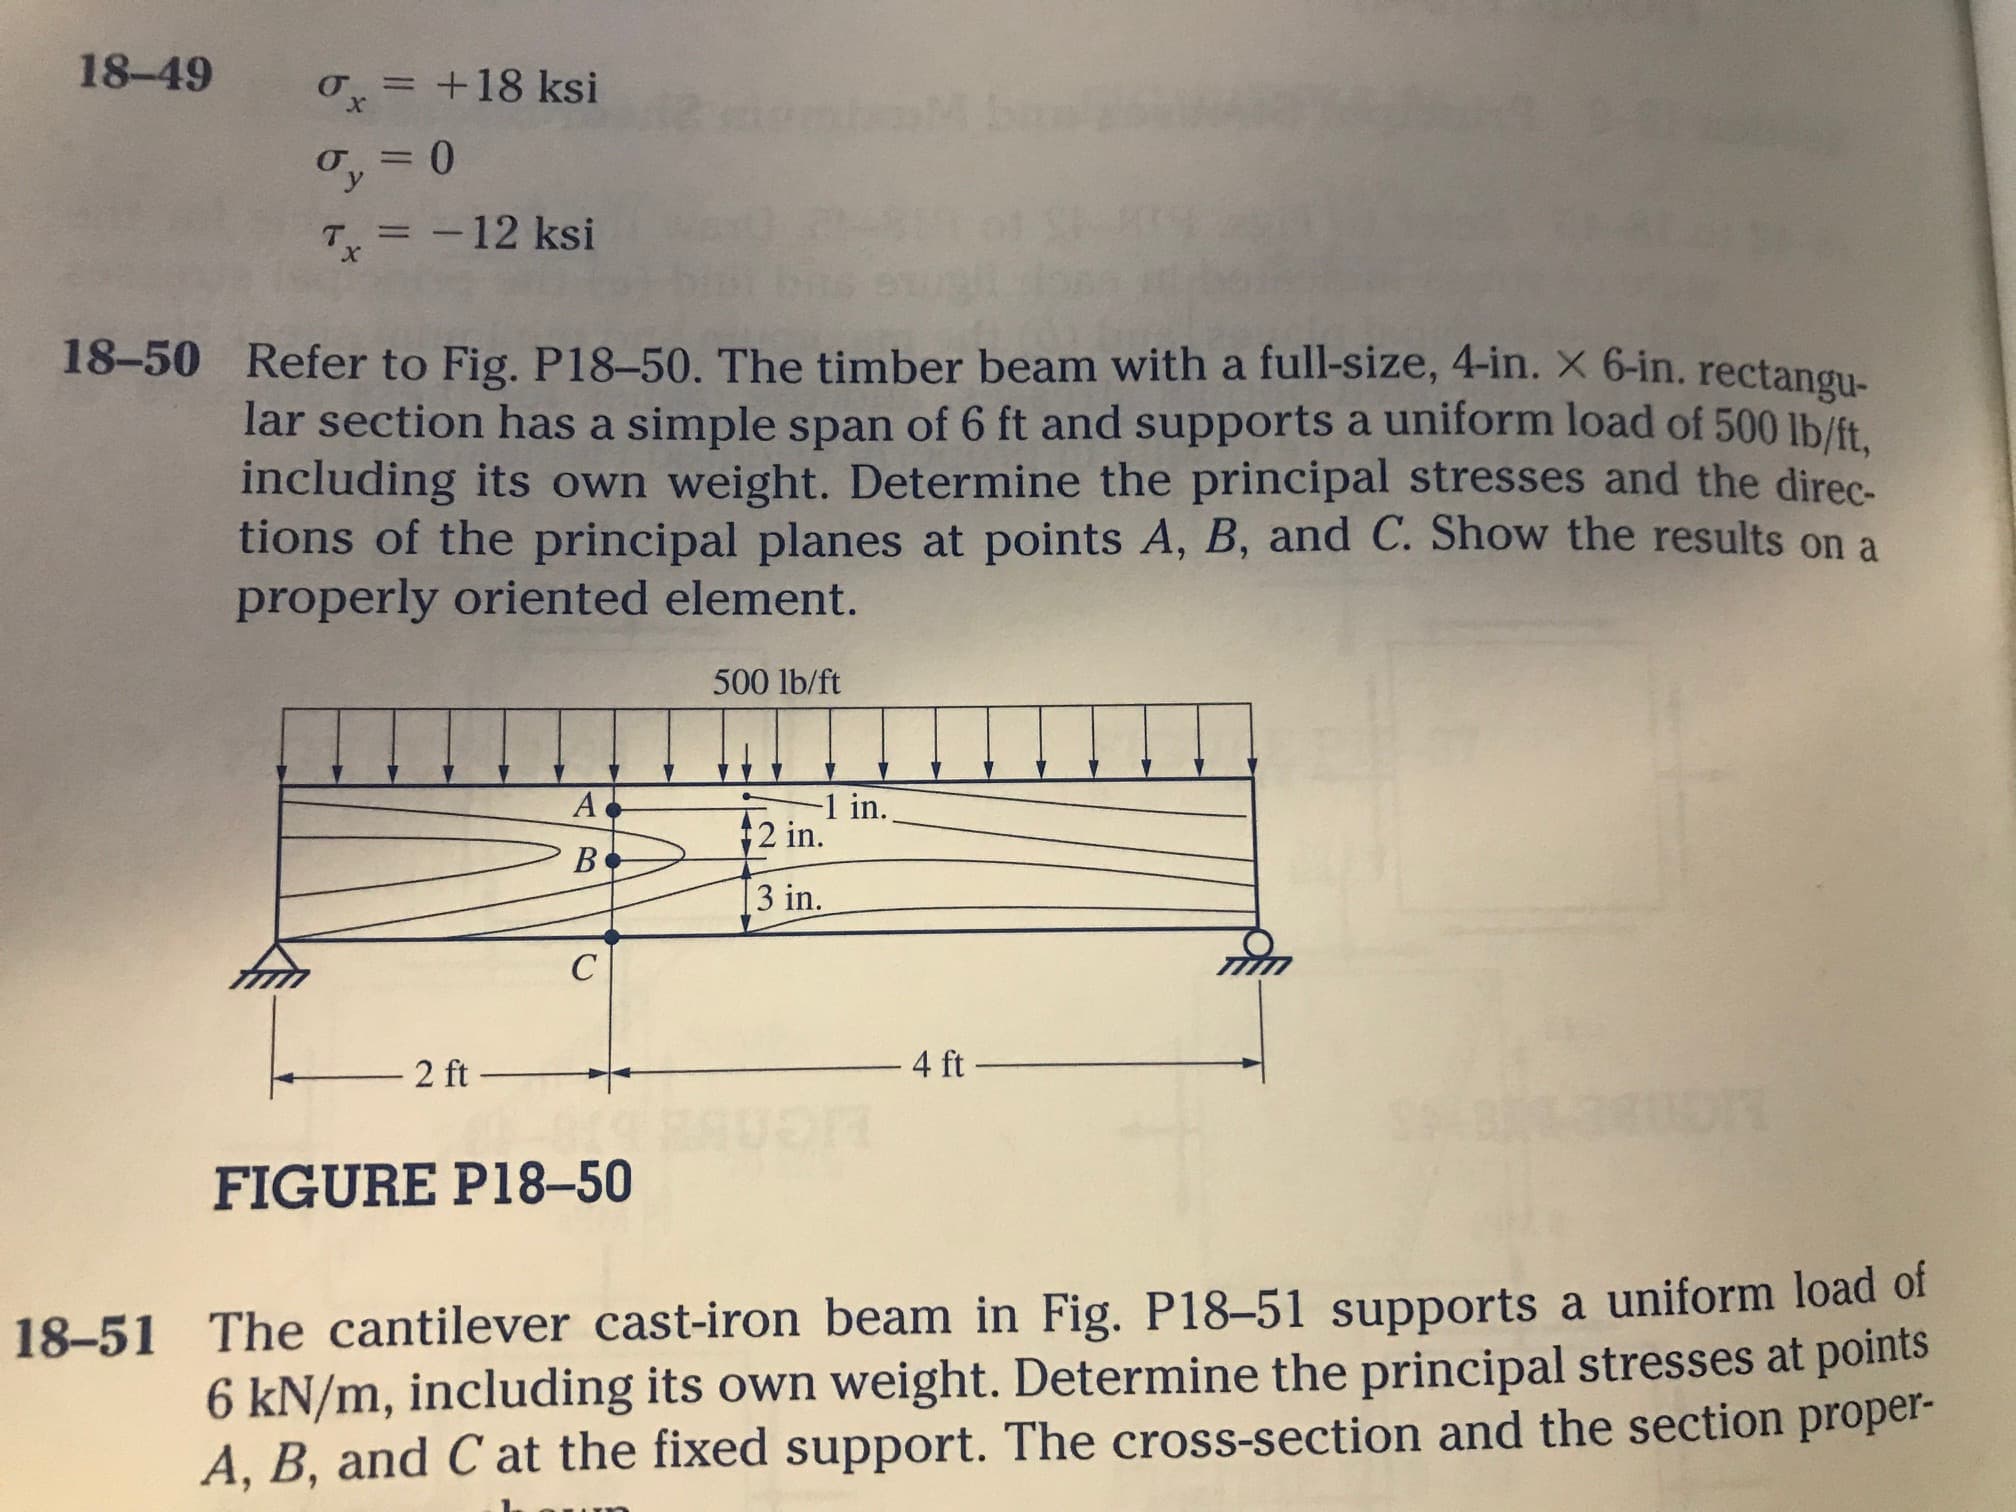 Refer to Fig. P18-50. The timber beam with a full-size, 4-in. X 6-in. rectangu-
lar section has a simple span of 6 ft and supports a uniform load of 500 lb/ft.
including its own weight. Determine the principal stresses and the direc
tions of the principal planes at points A, B, and C. Show the results on a
properly oriented element.
